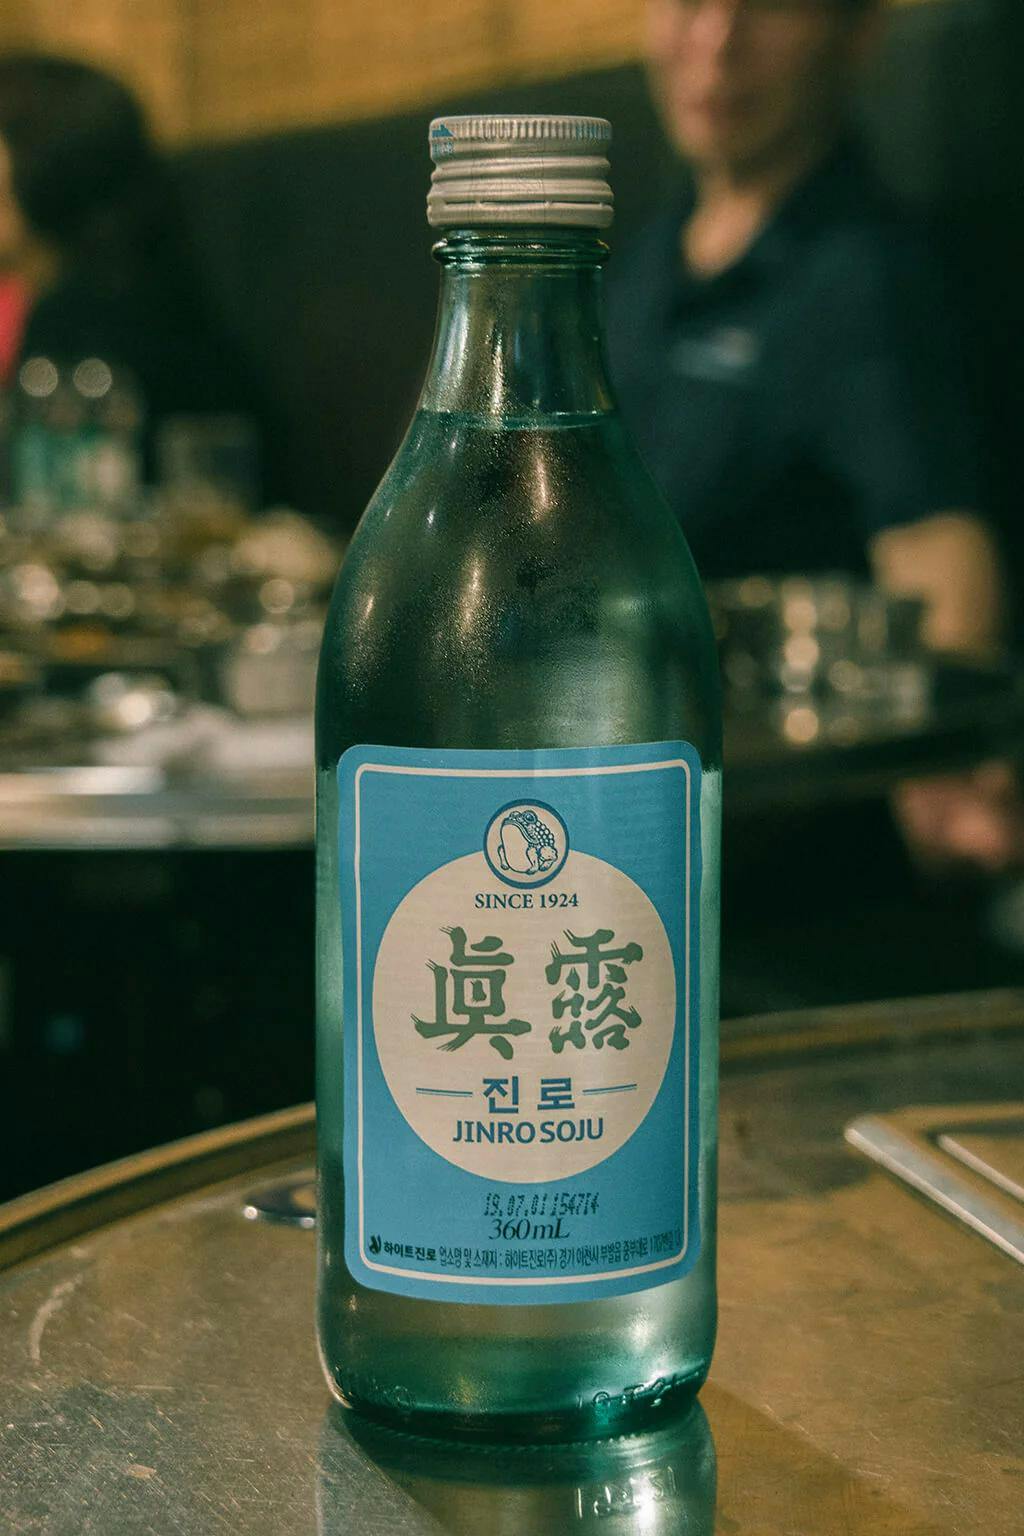 Jinro is not only the bestselling soju brand, but the bestselling alcohol brand in the world.